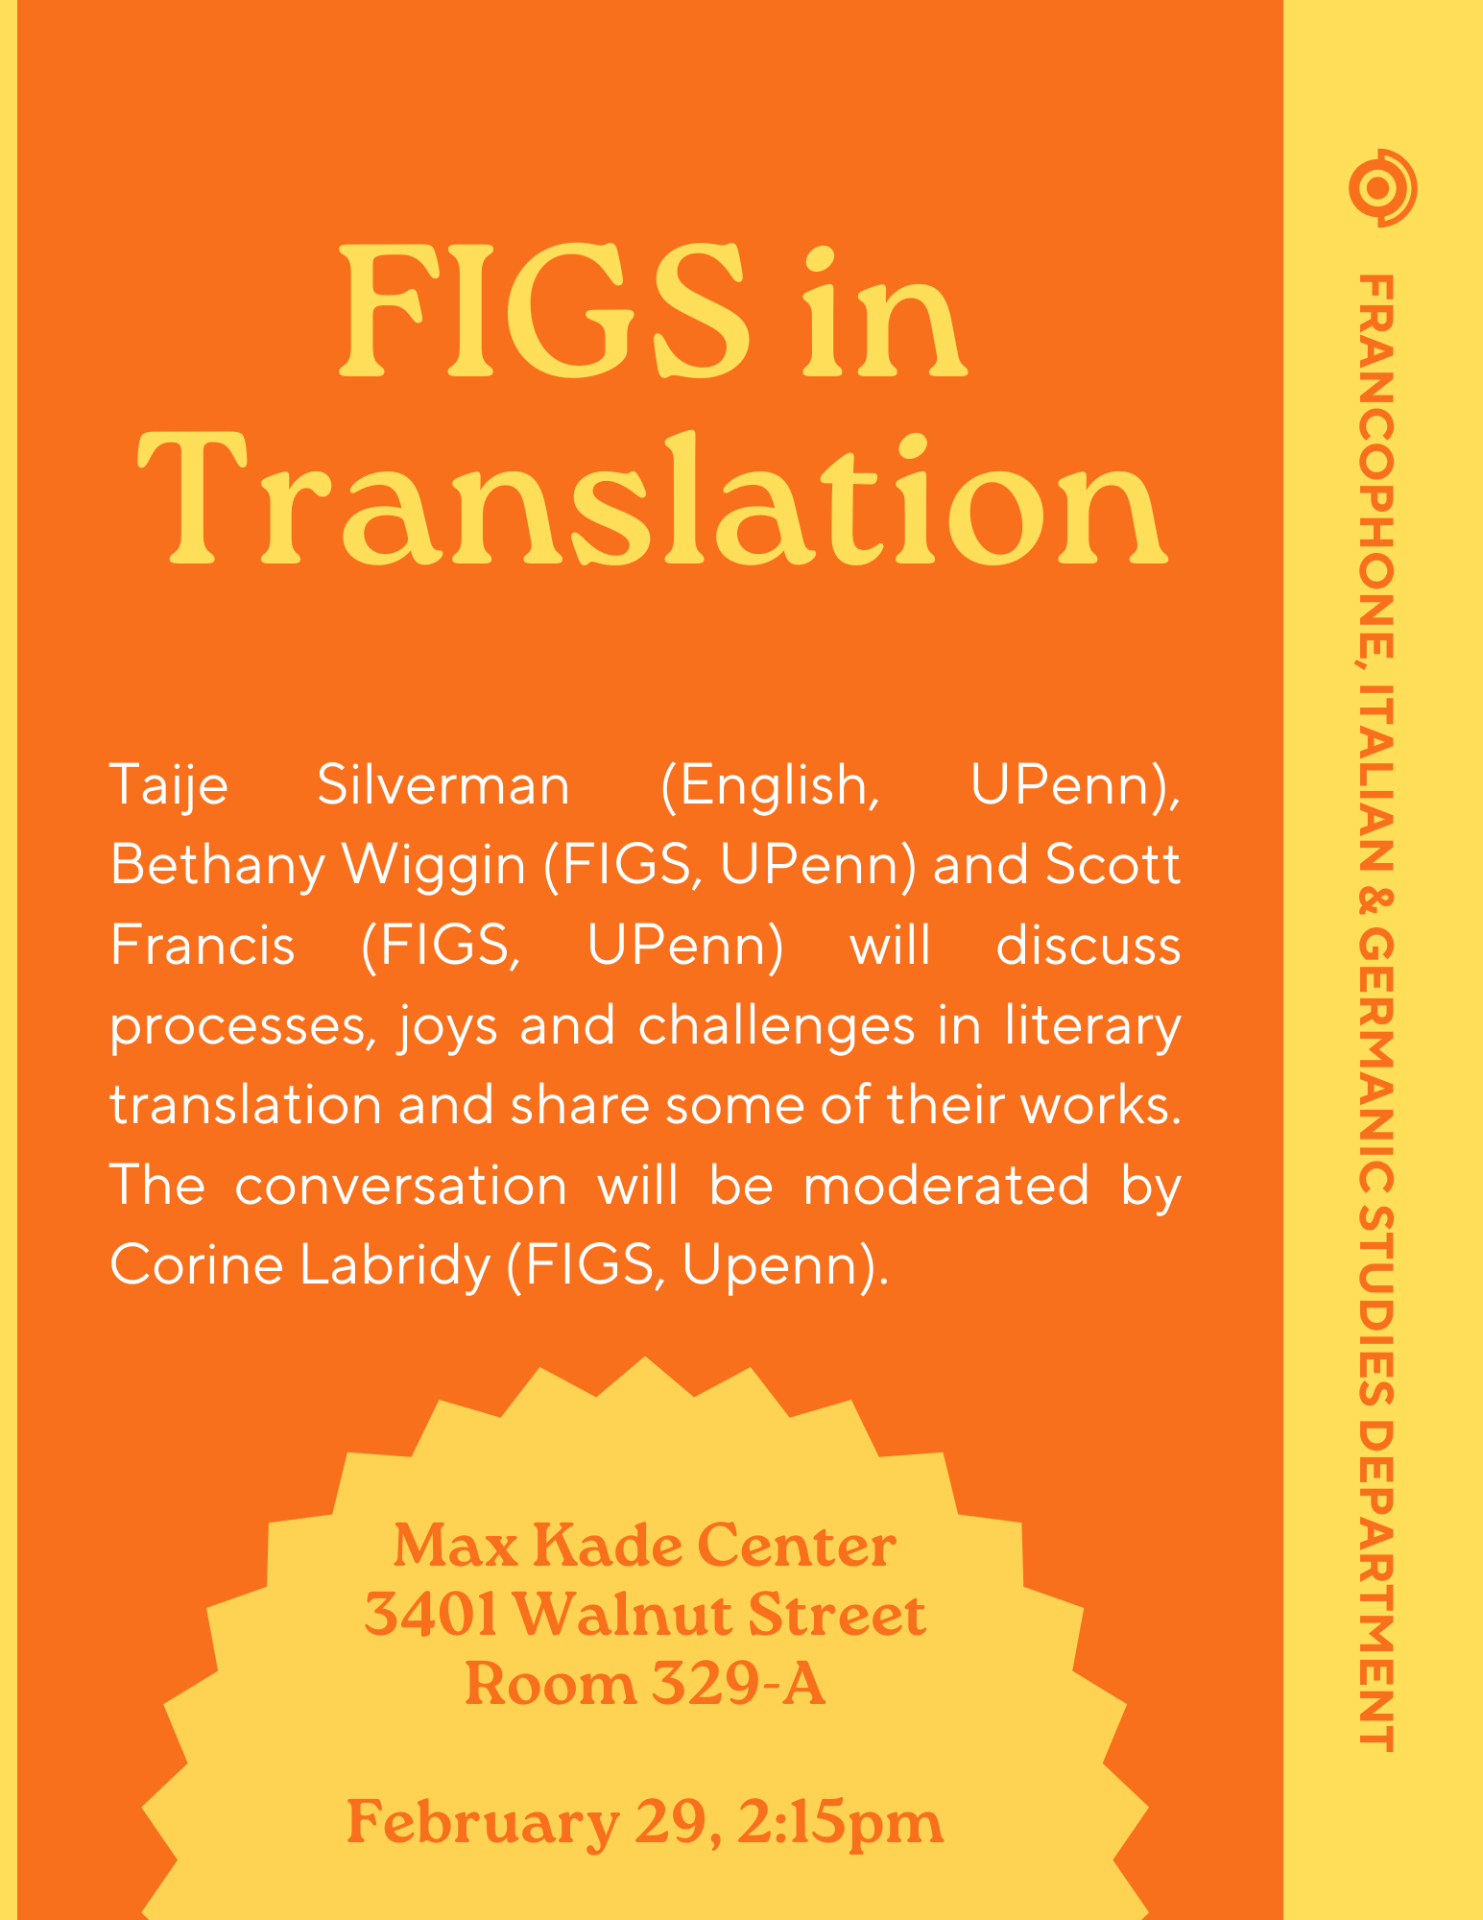 FIGS in Translation poster